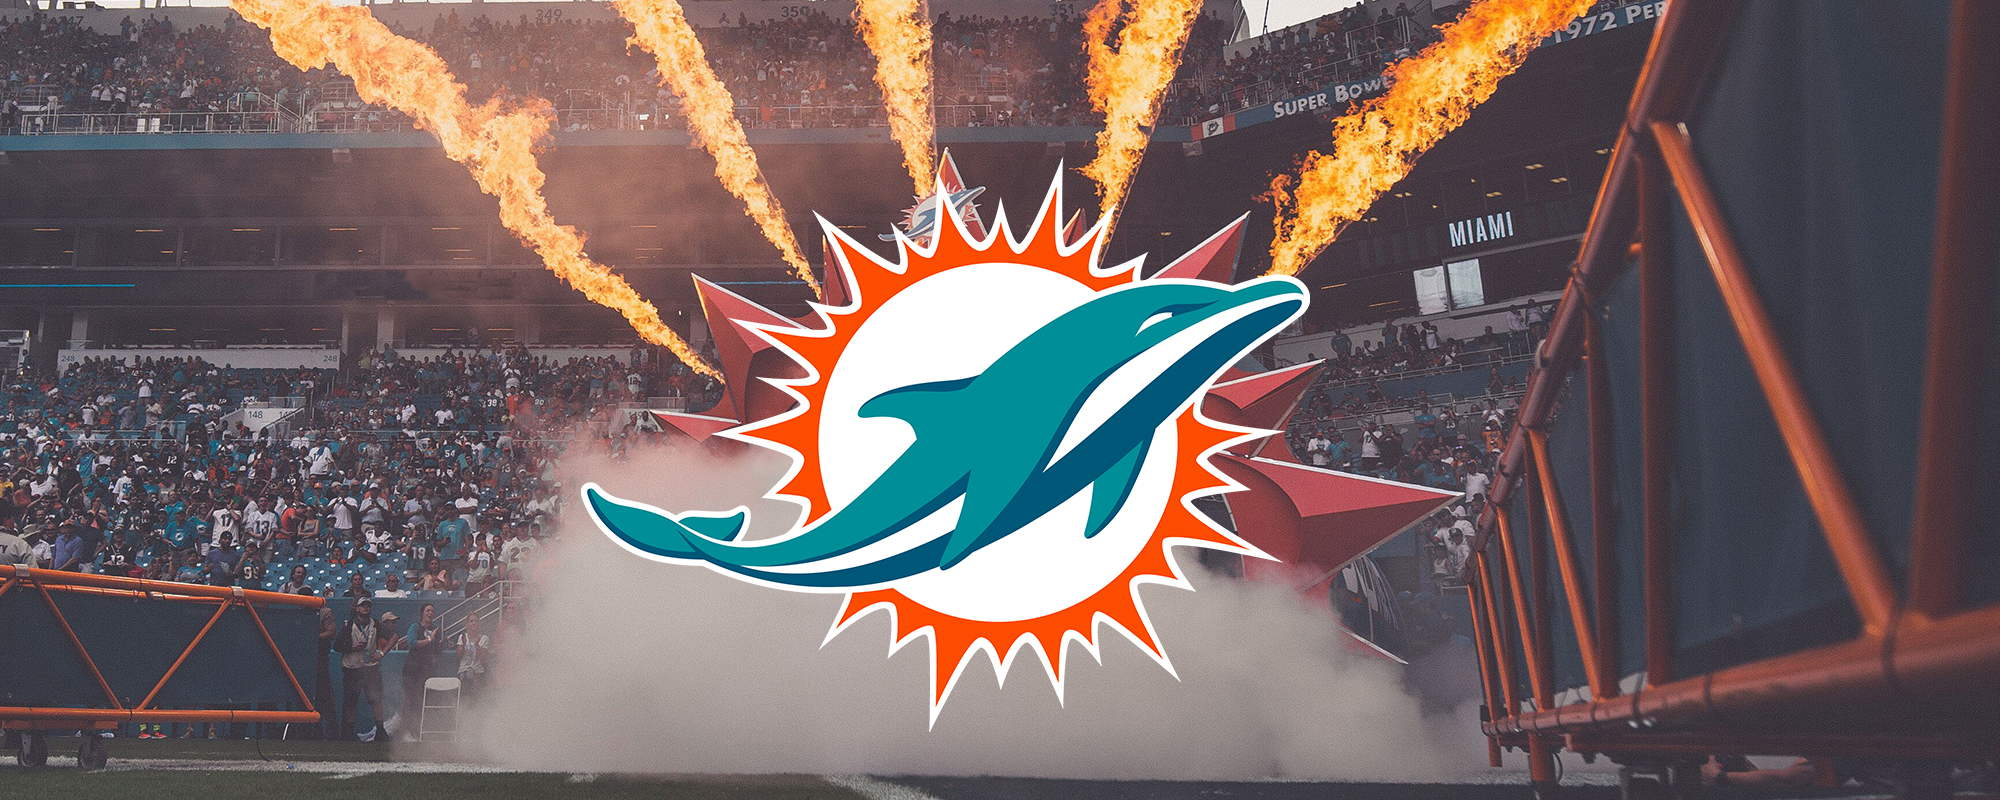 miami dolphins official page